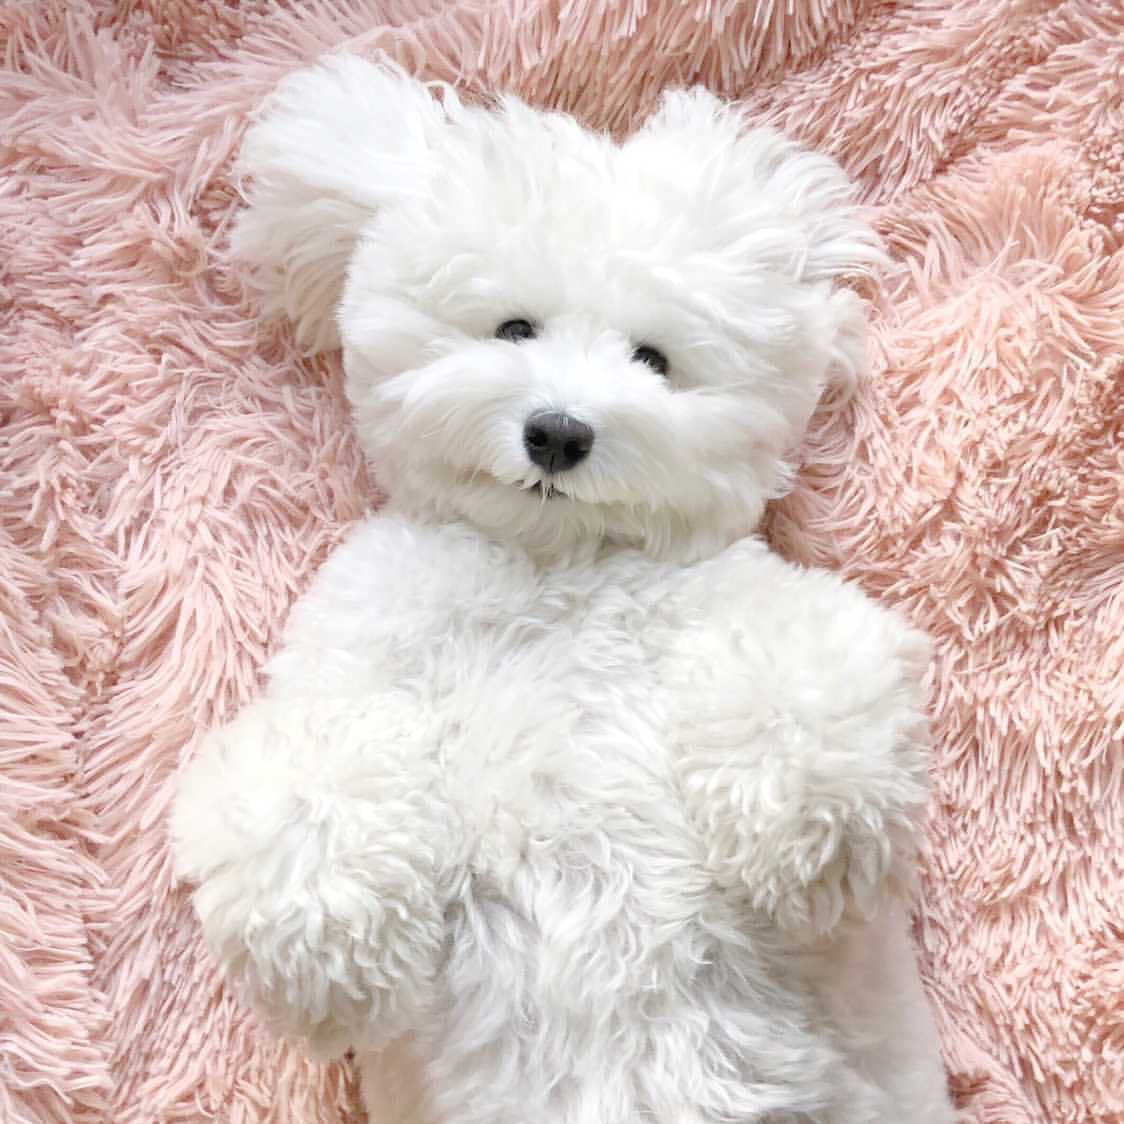 Extra small mini teddy bear schnoodle on pink blanket